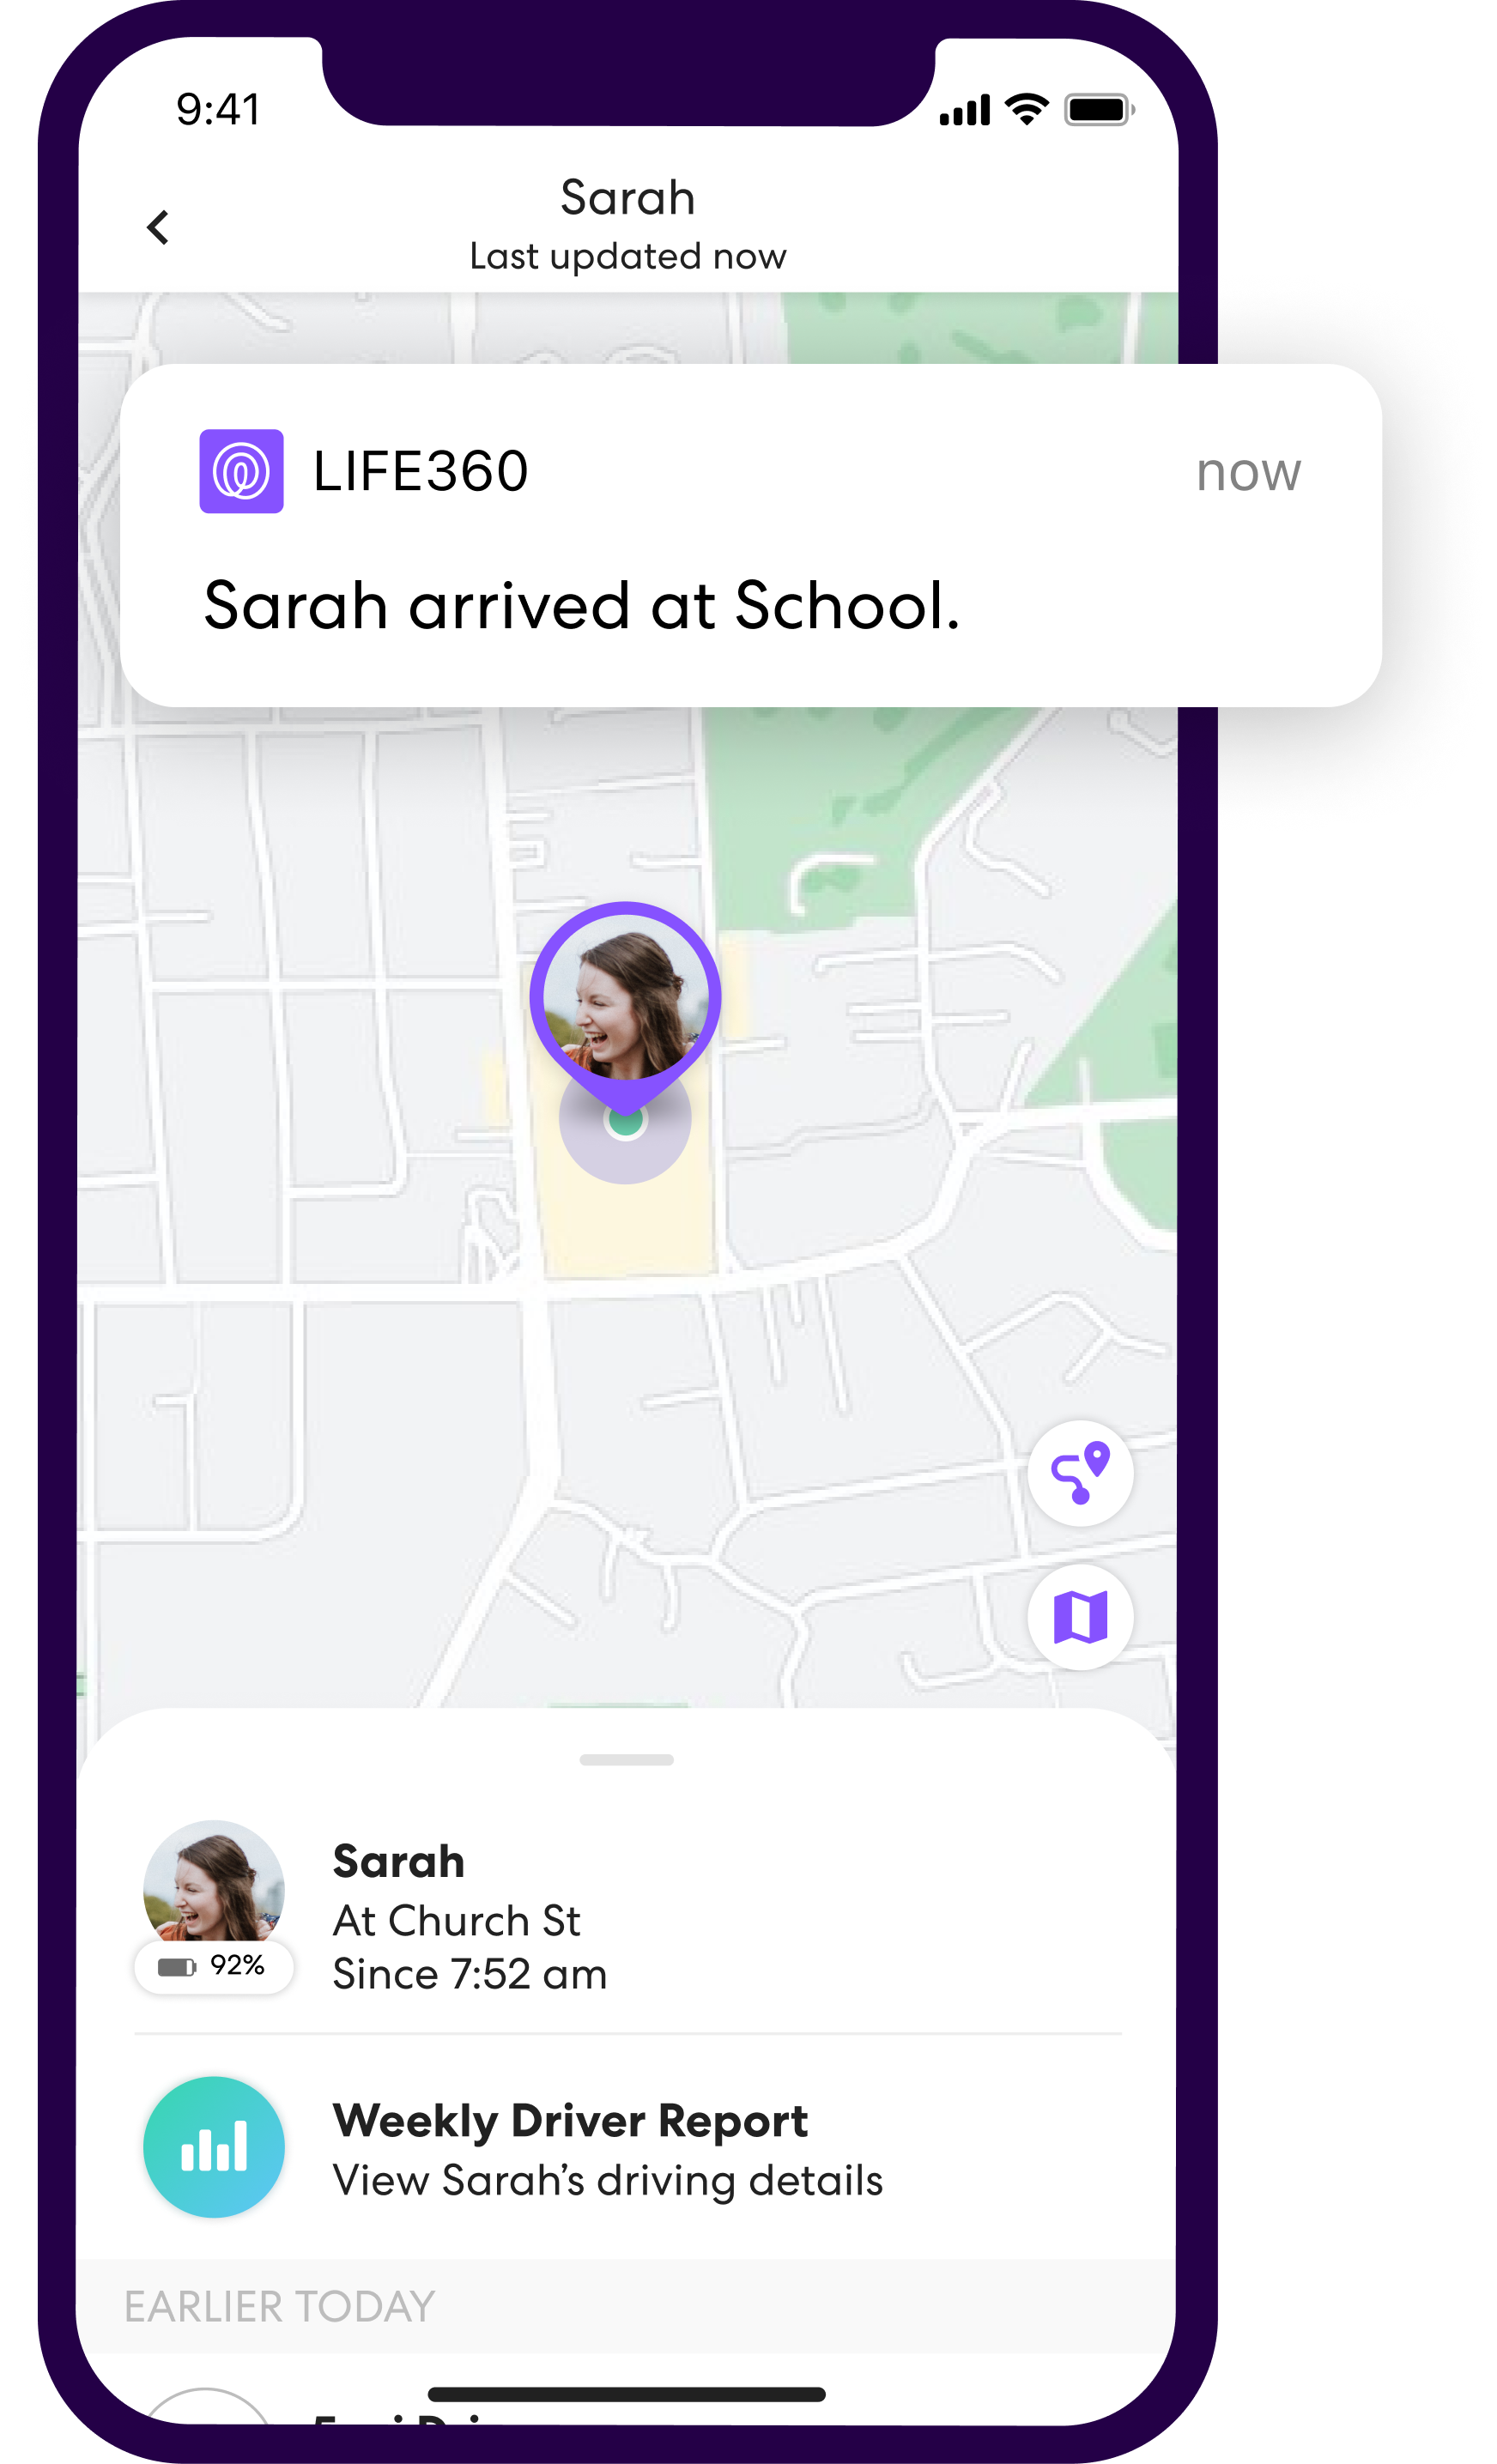 Life360 Place Alert notification on mobile phone